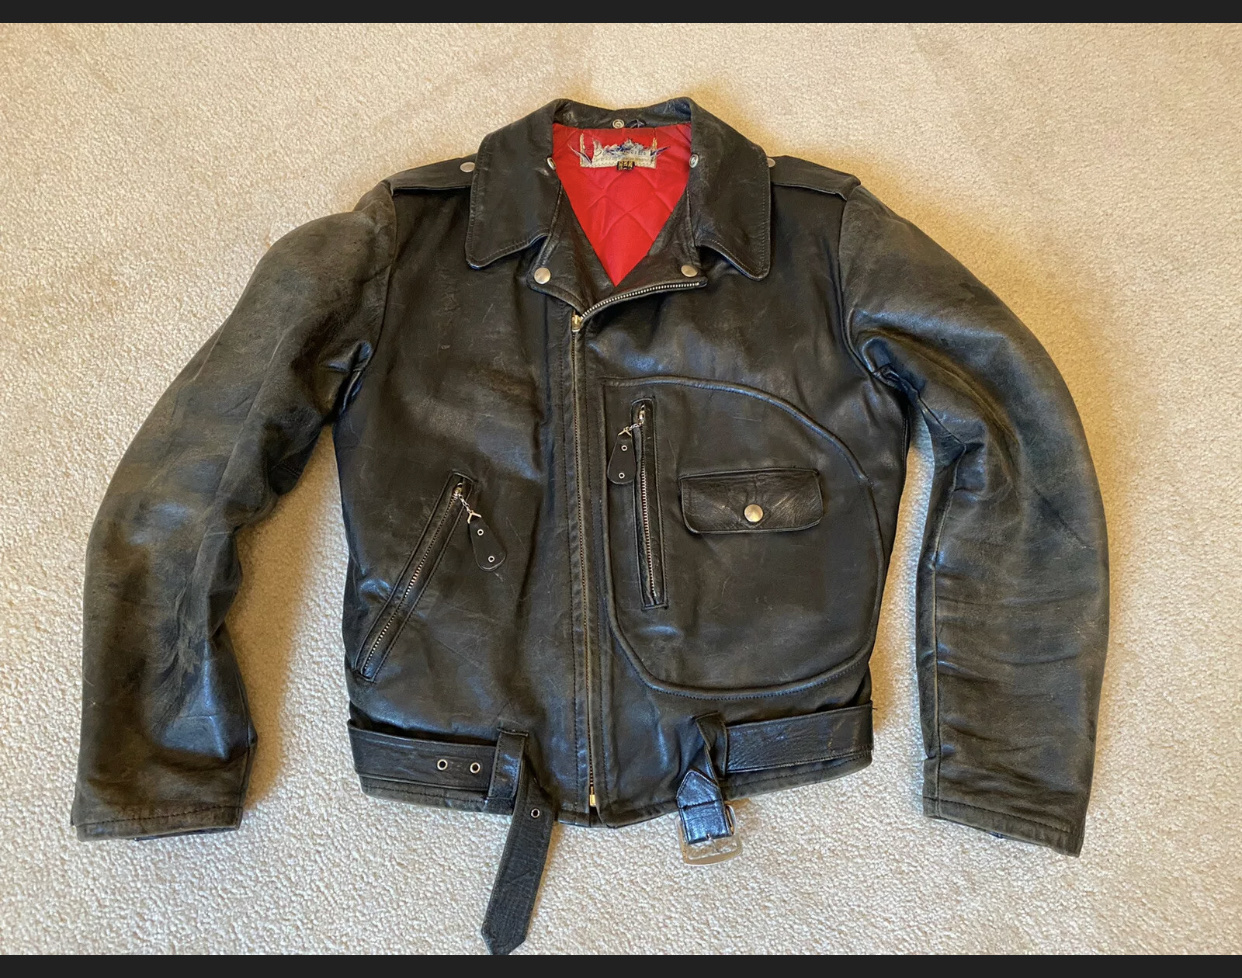 Finds and Deals - Leather Jacket Edition | Page 352 | The Fedora 